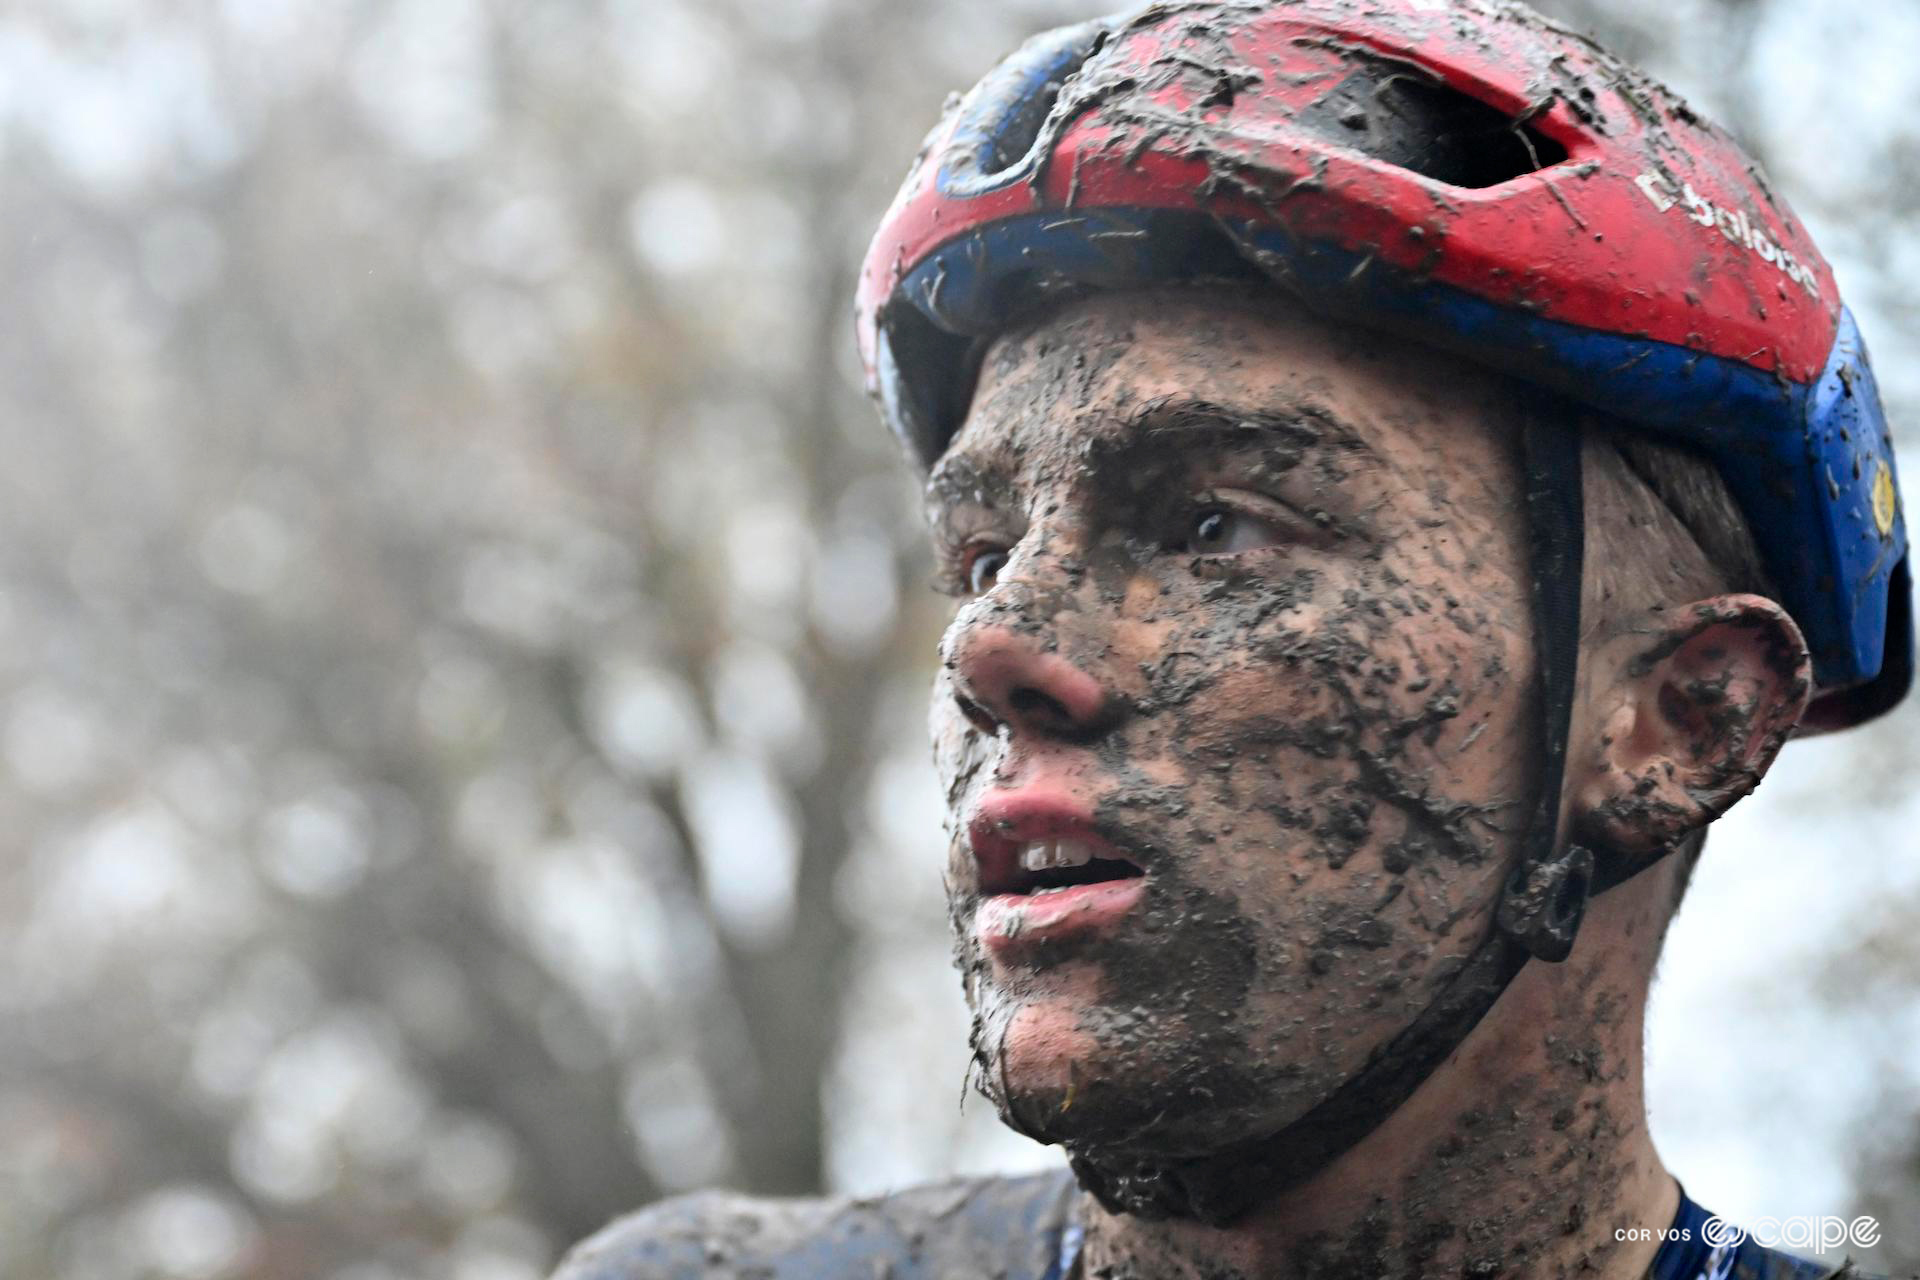 Close-up of Thibau Nys after CX World Cup Dublin, his face and helmet splattered with mud at various degrees of dryness, gazing off into the distance after a hard race.